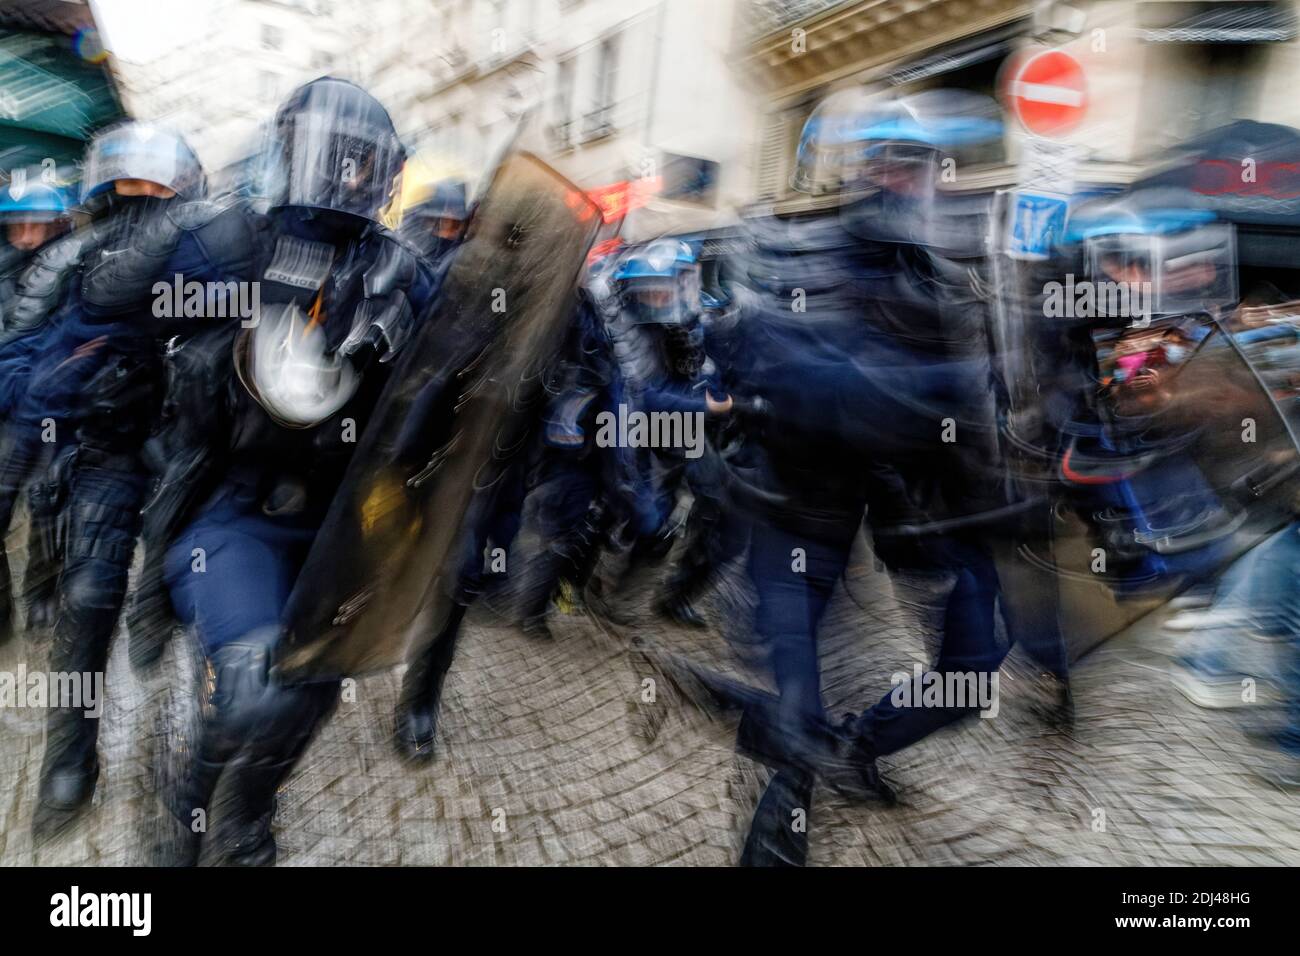 Paris, France. 12th Dec, 2020. March of freedoms against the Global Security and the Liberticide Laws on December 12, 2020 in Paris, France. Stock Photo